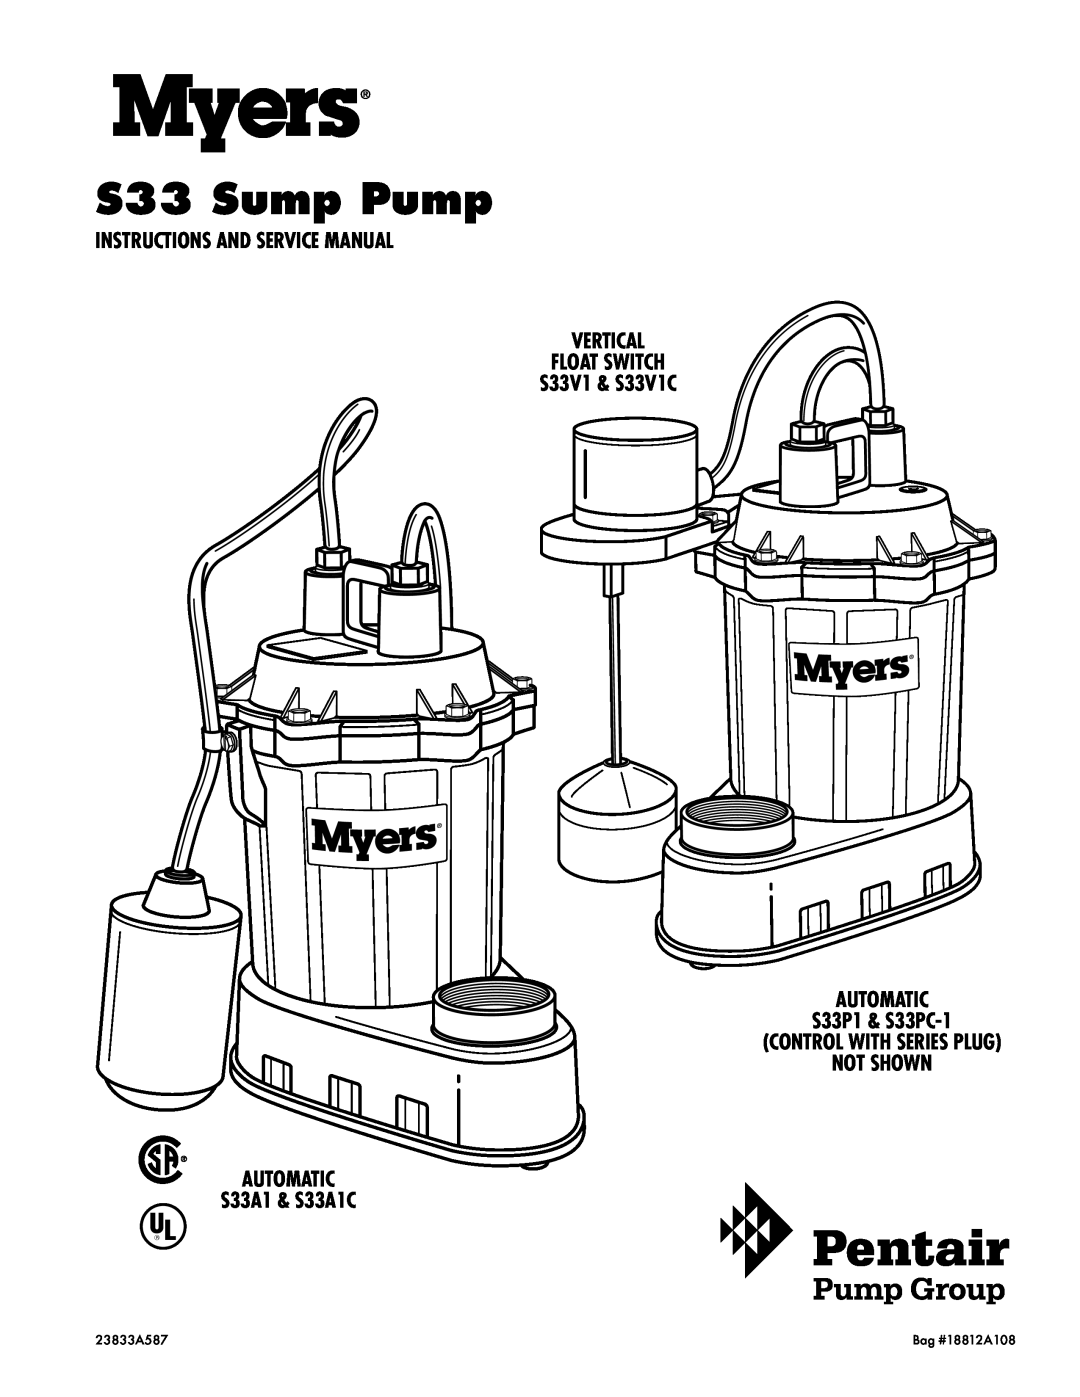 Pentair service manual S33 Sump Pump, FLOAT SWITCH S33V1 & S33V1C AUTOMATIC, S33P1 & S33PC-1 CONTROL WITH SERIES PLUG 